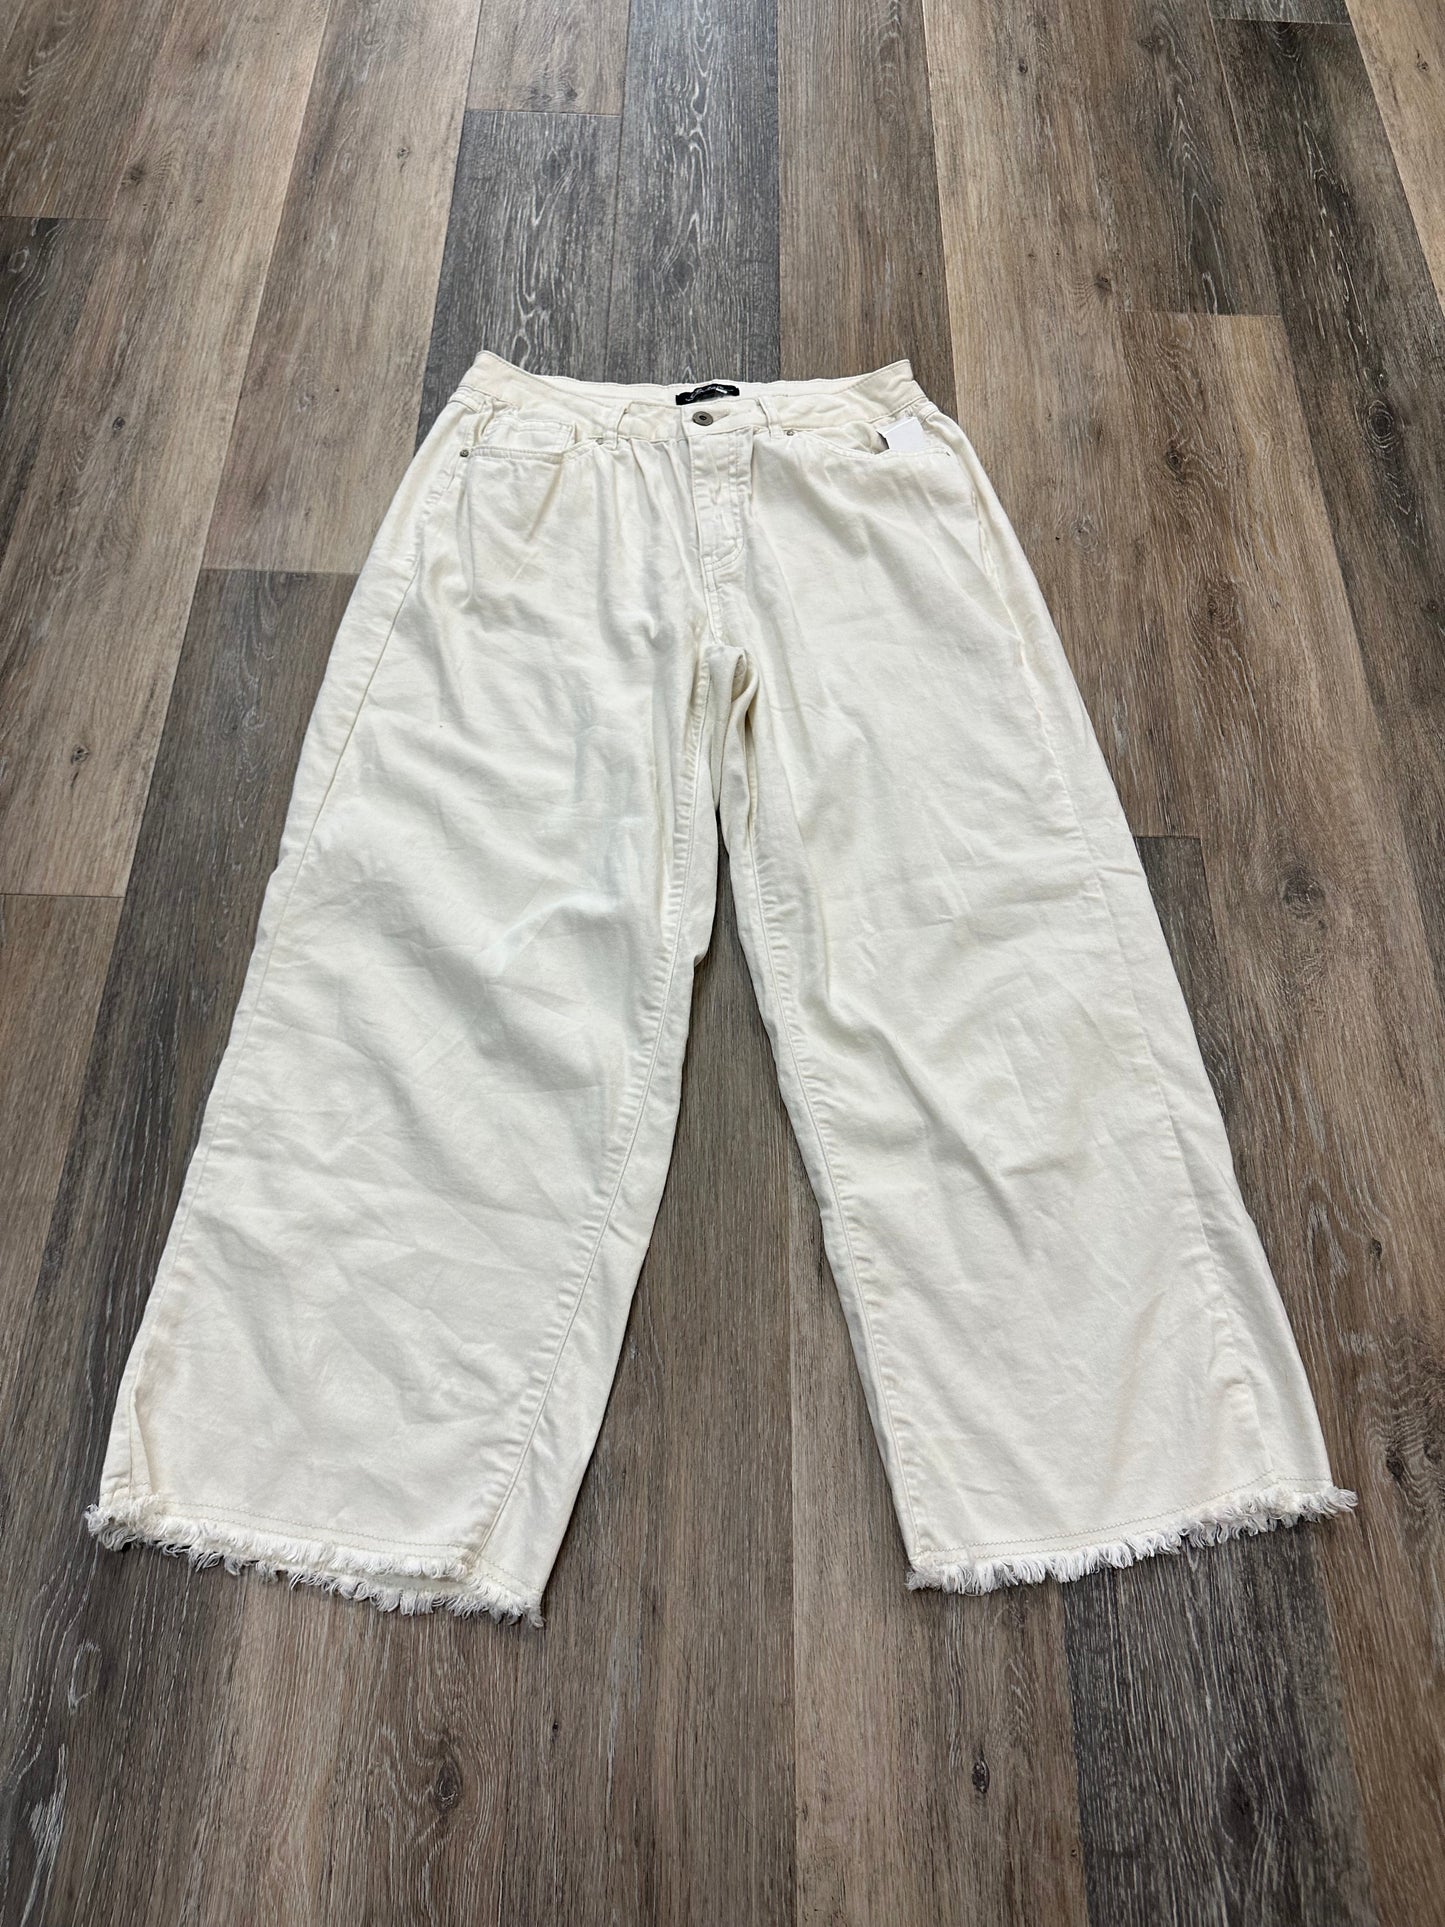 Cream Pants Ankle Charlie B, Size 8